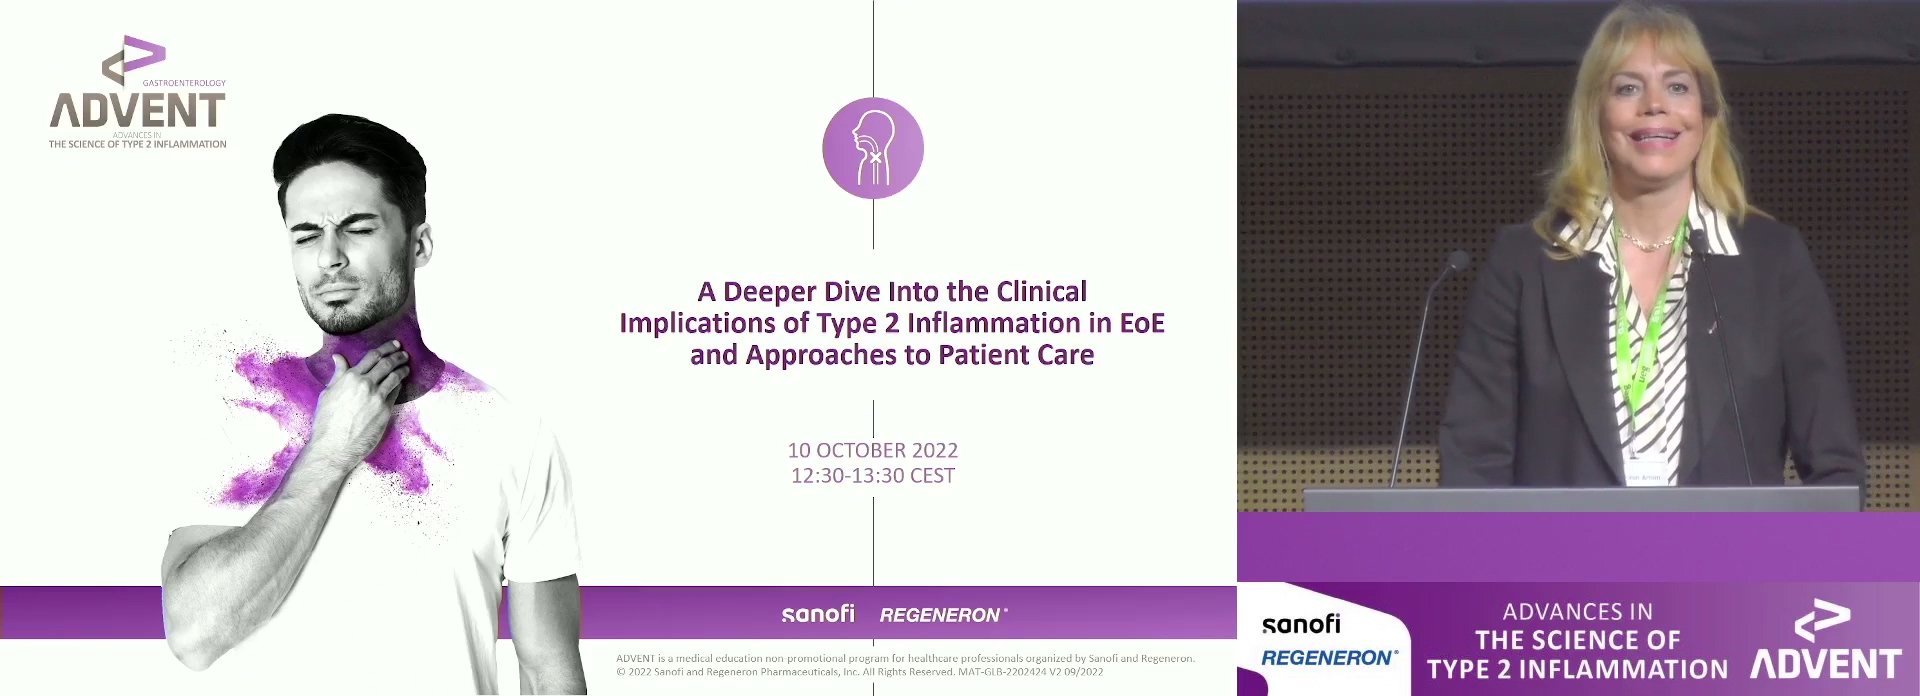 A Deeper Dive Into the Clinical Implications of Type 2 Inflammation in EoE and Approaches to Patient Care (Sanofi)